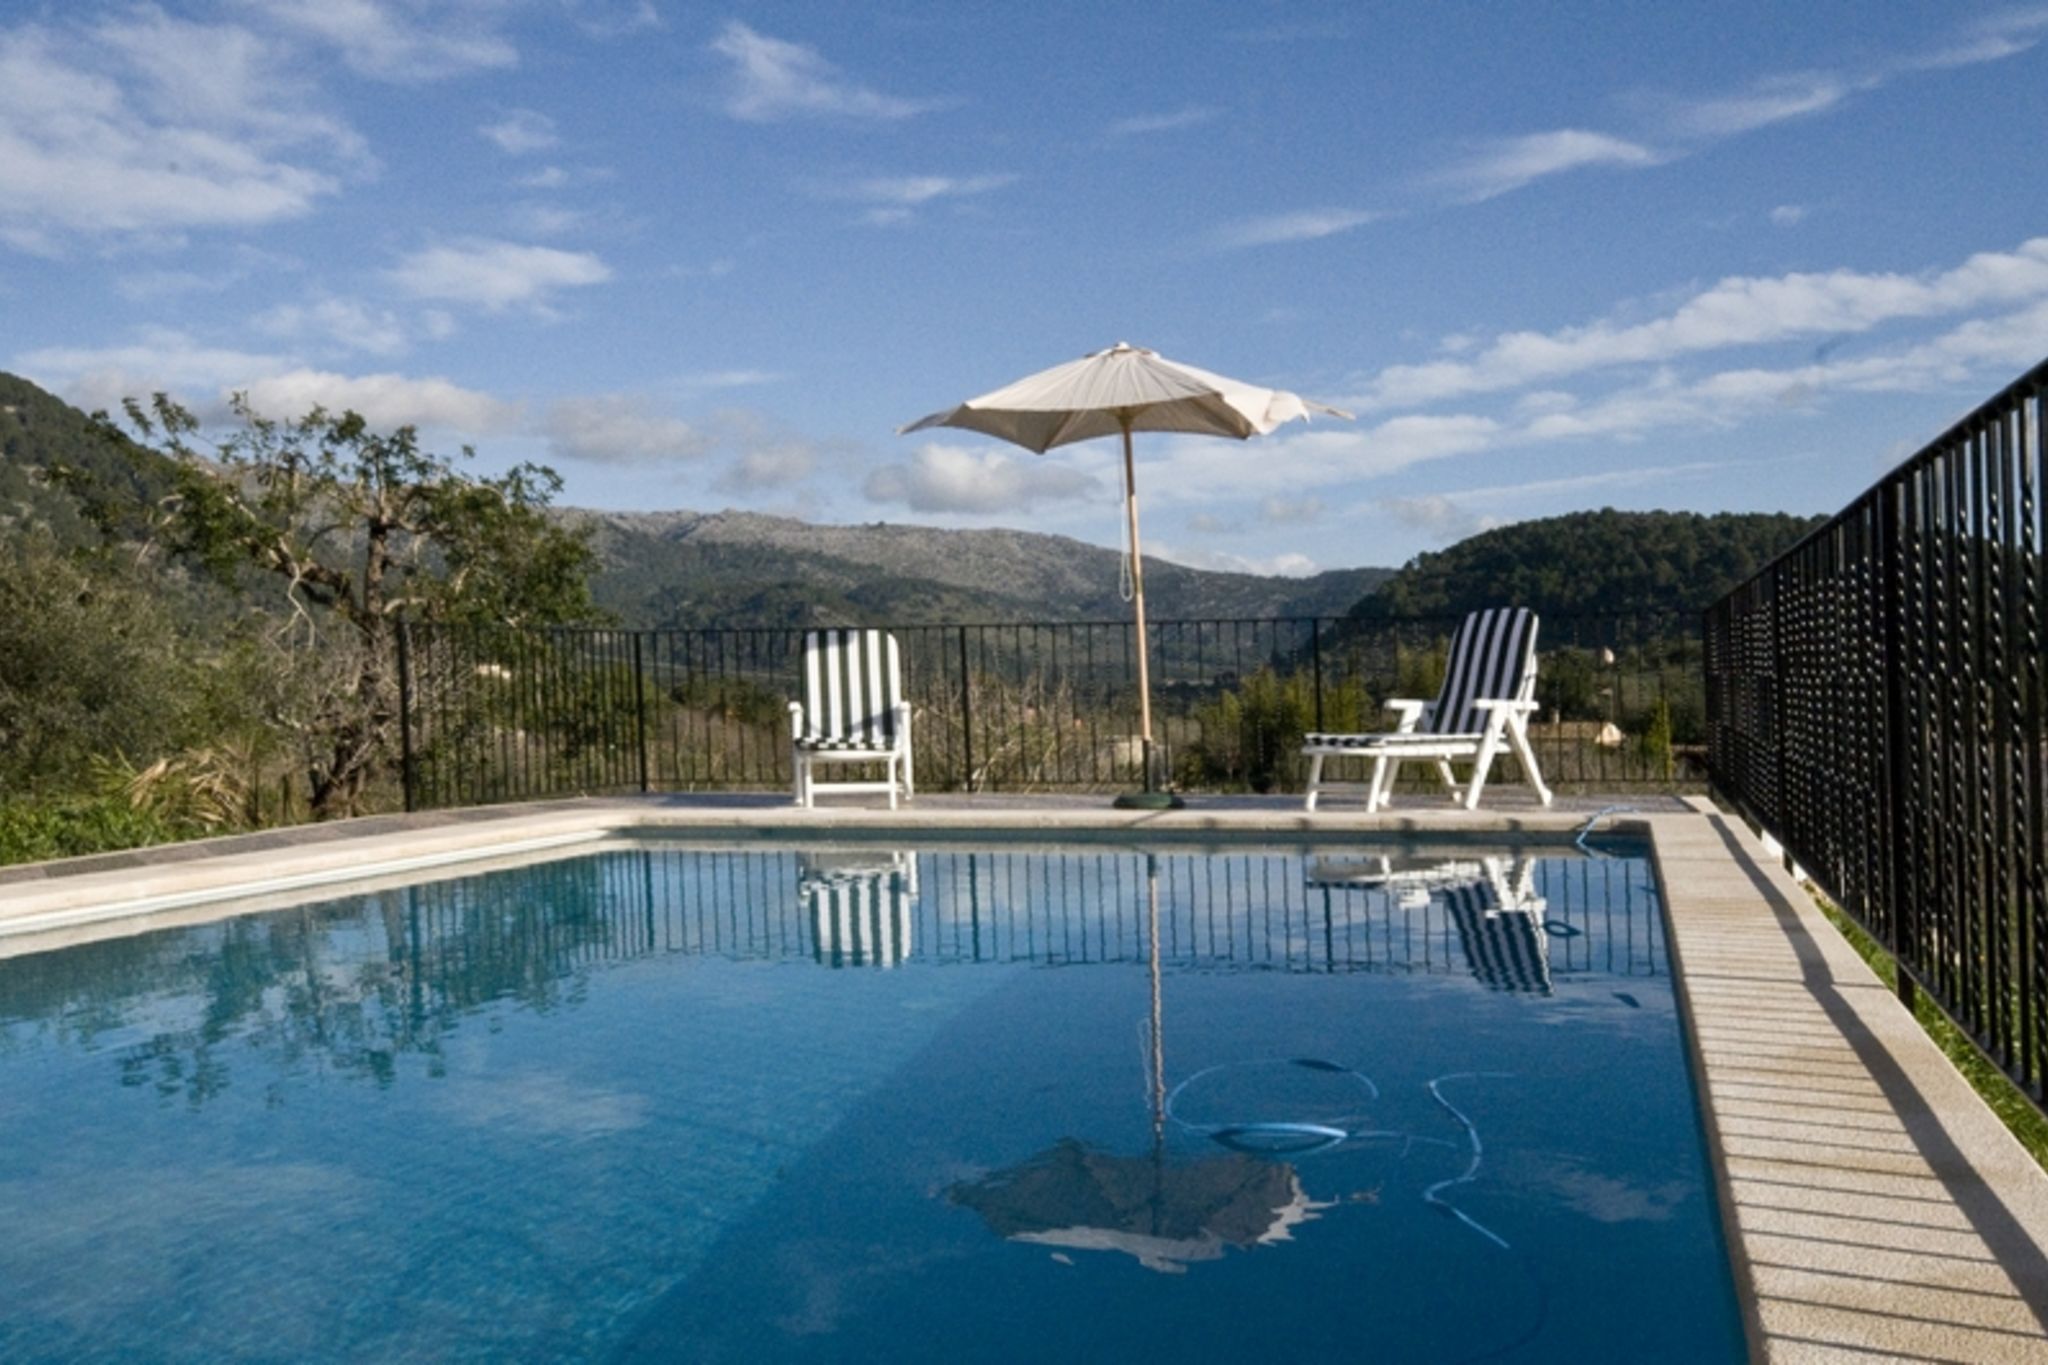 Amazing country house with panoramic views of the Tramuntana mountains